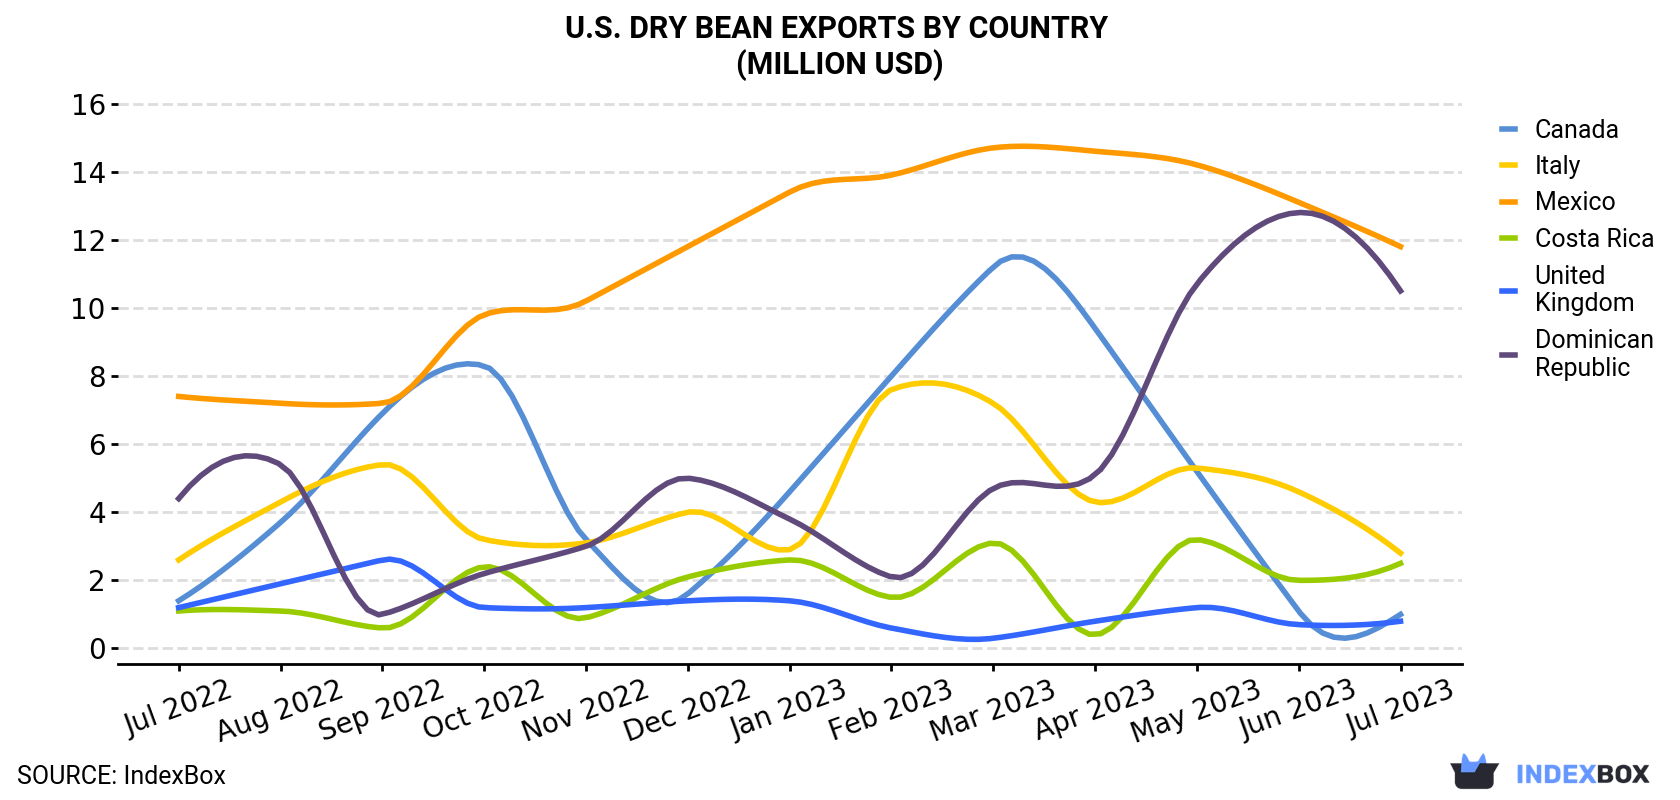 U.S. Dry Bean Exports By Country (Million USD)